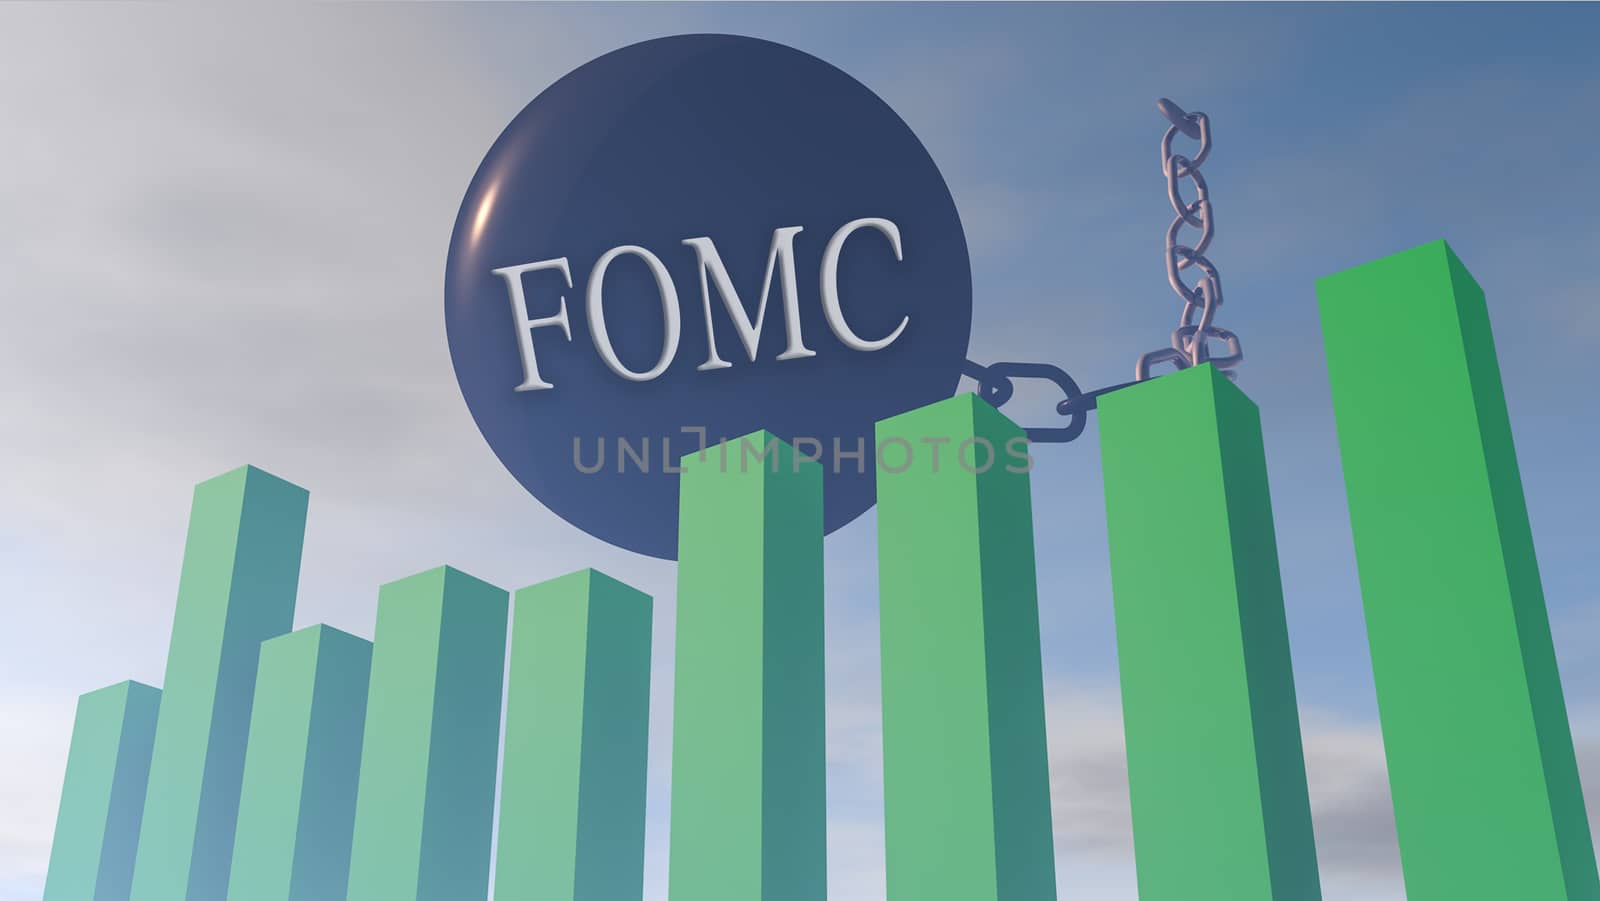 3D rendering illustration of financial stock market influenced by FOMC